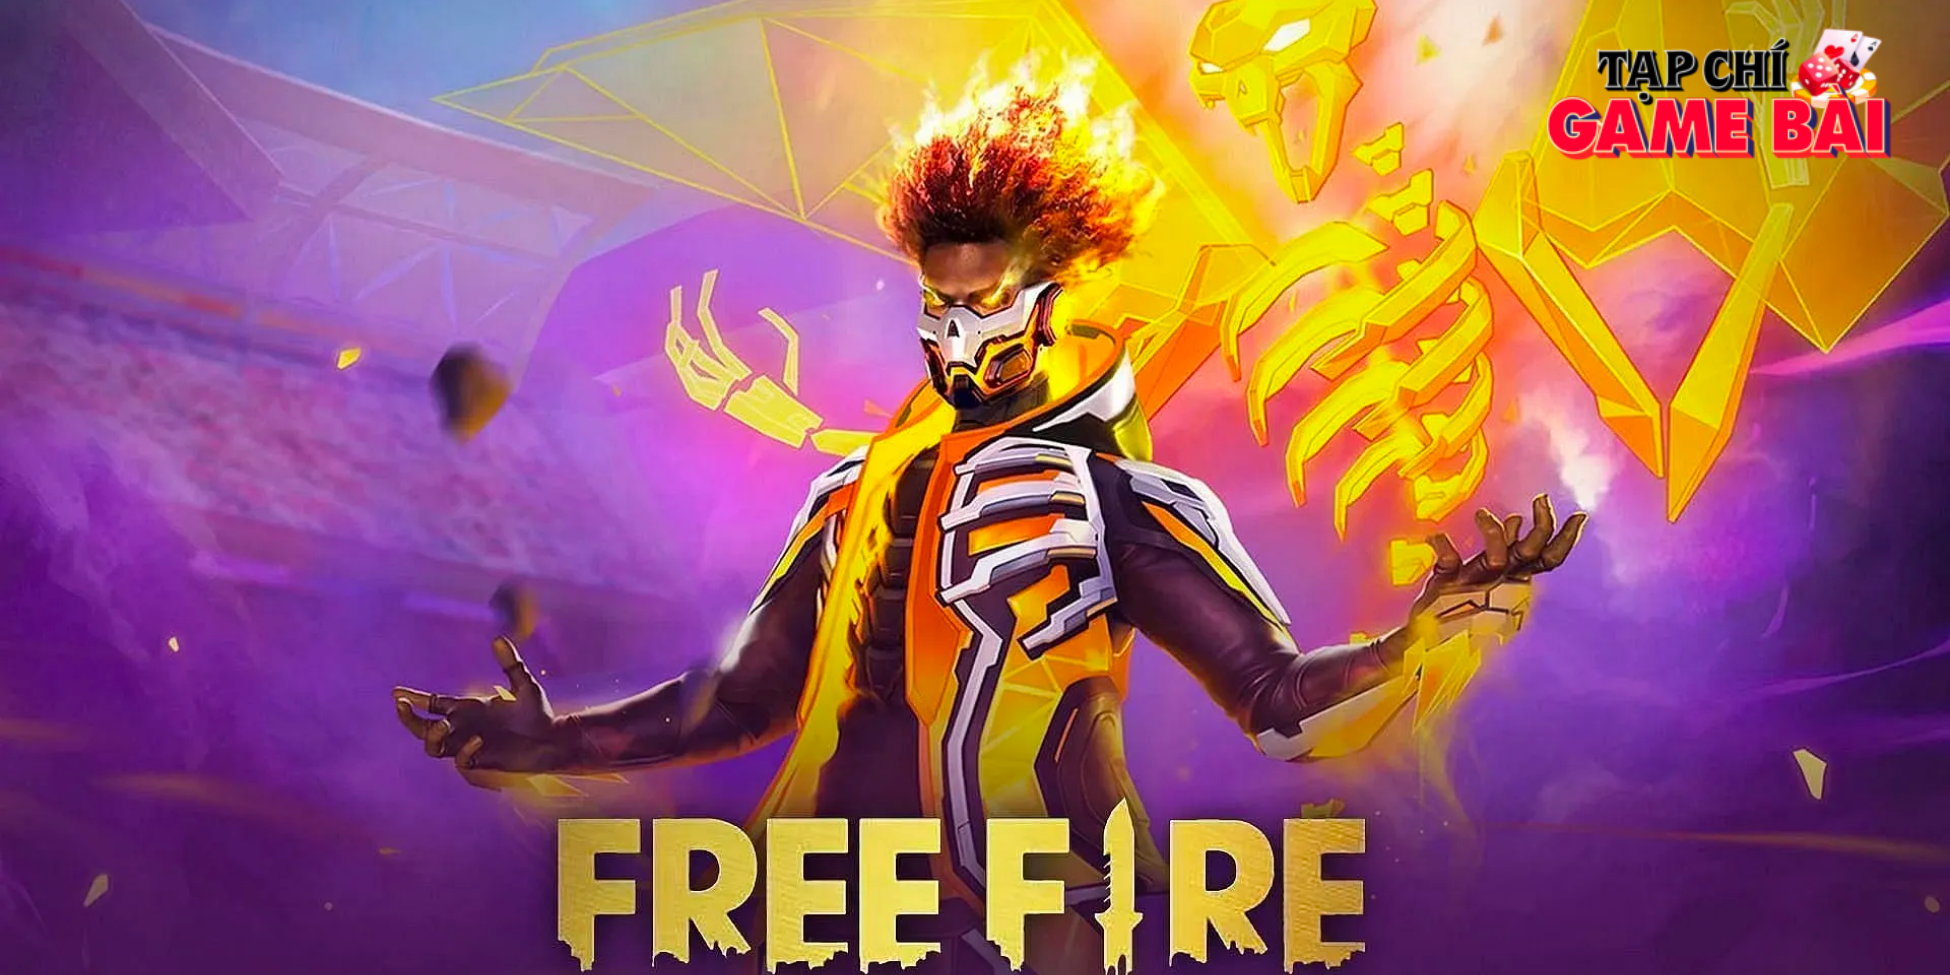 Game free fire